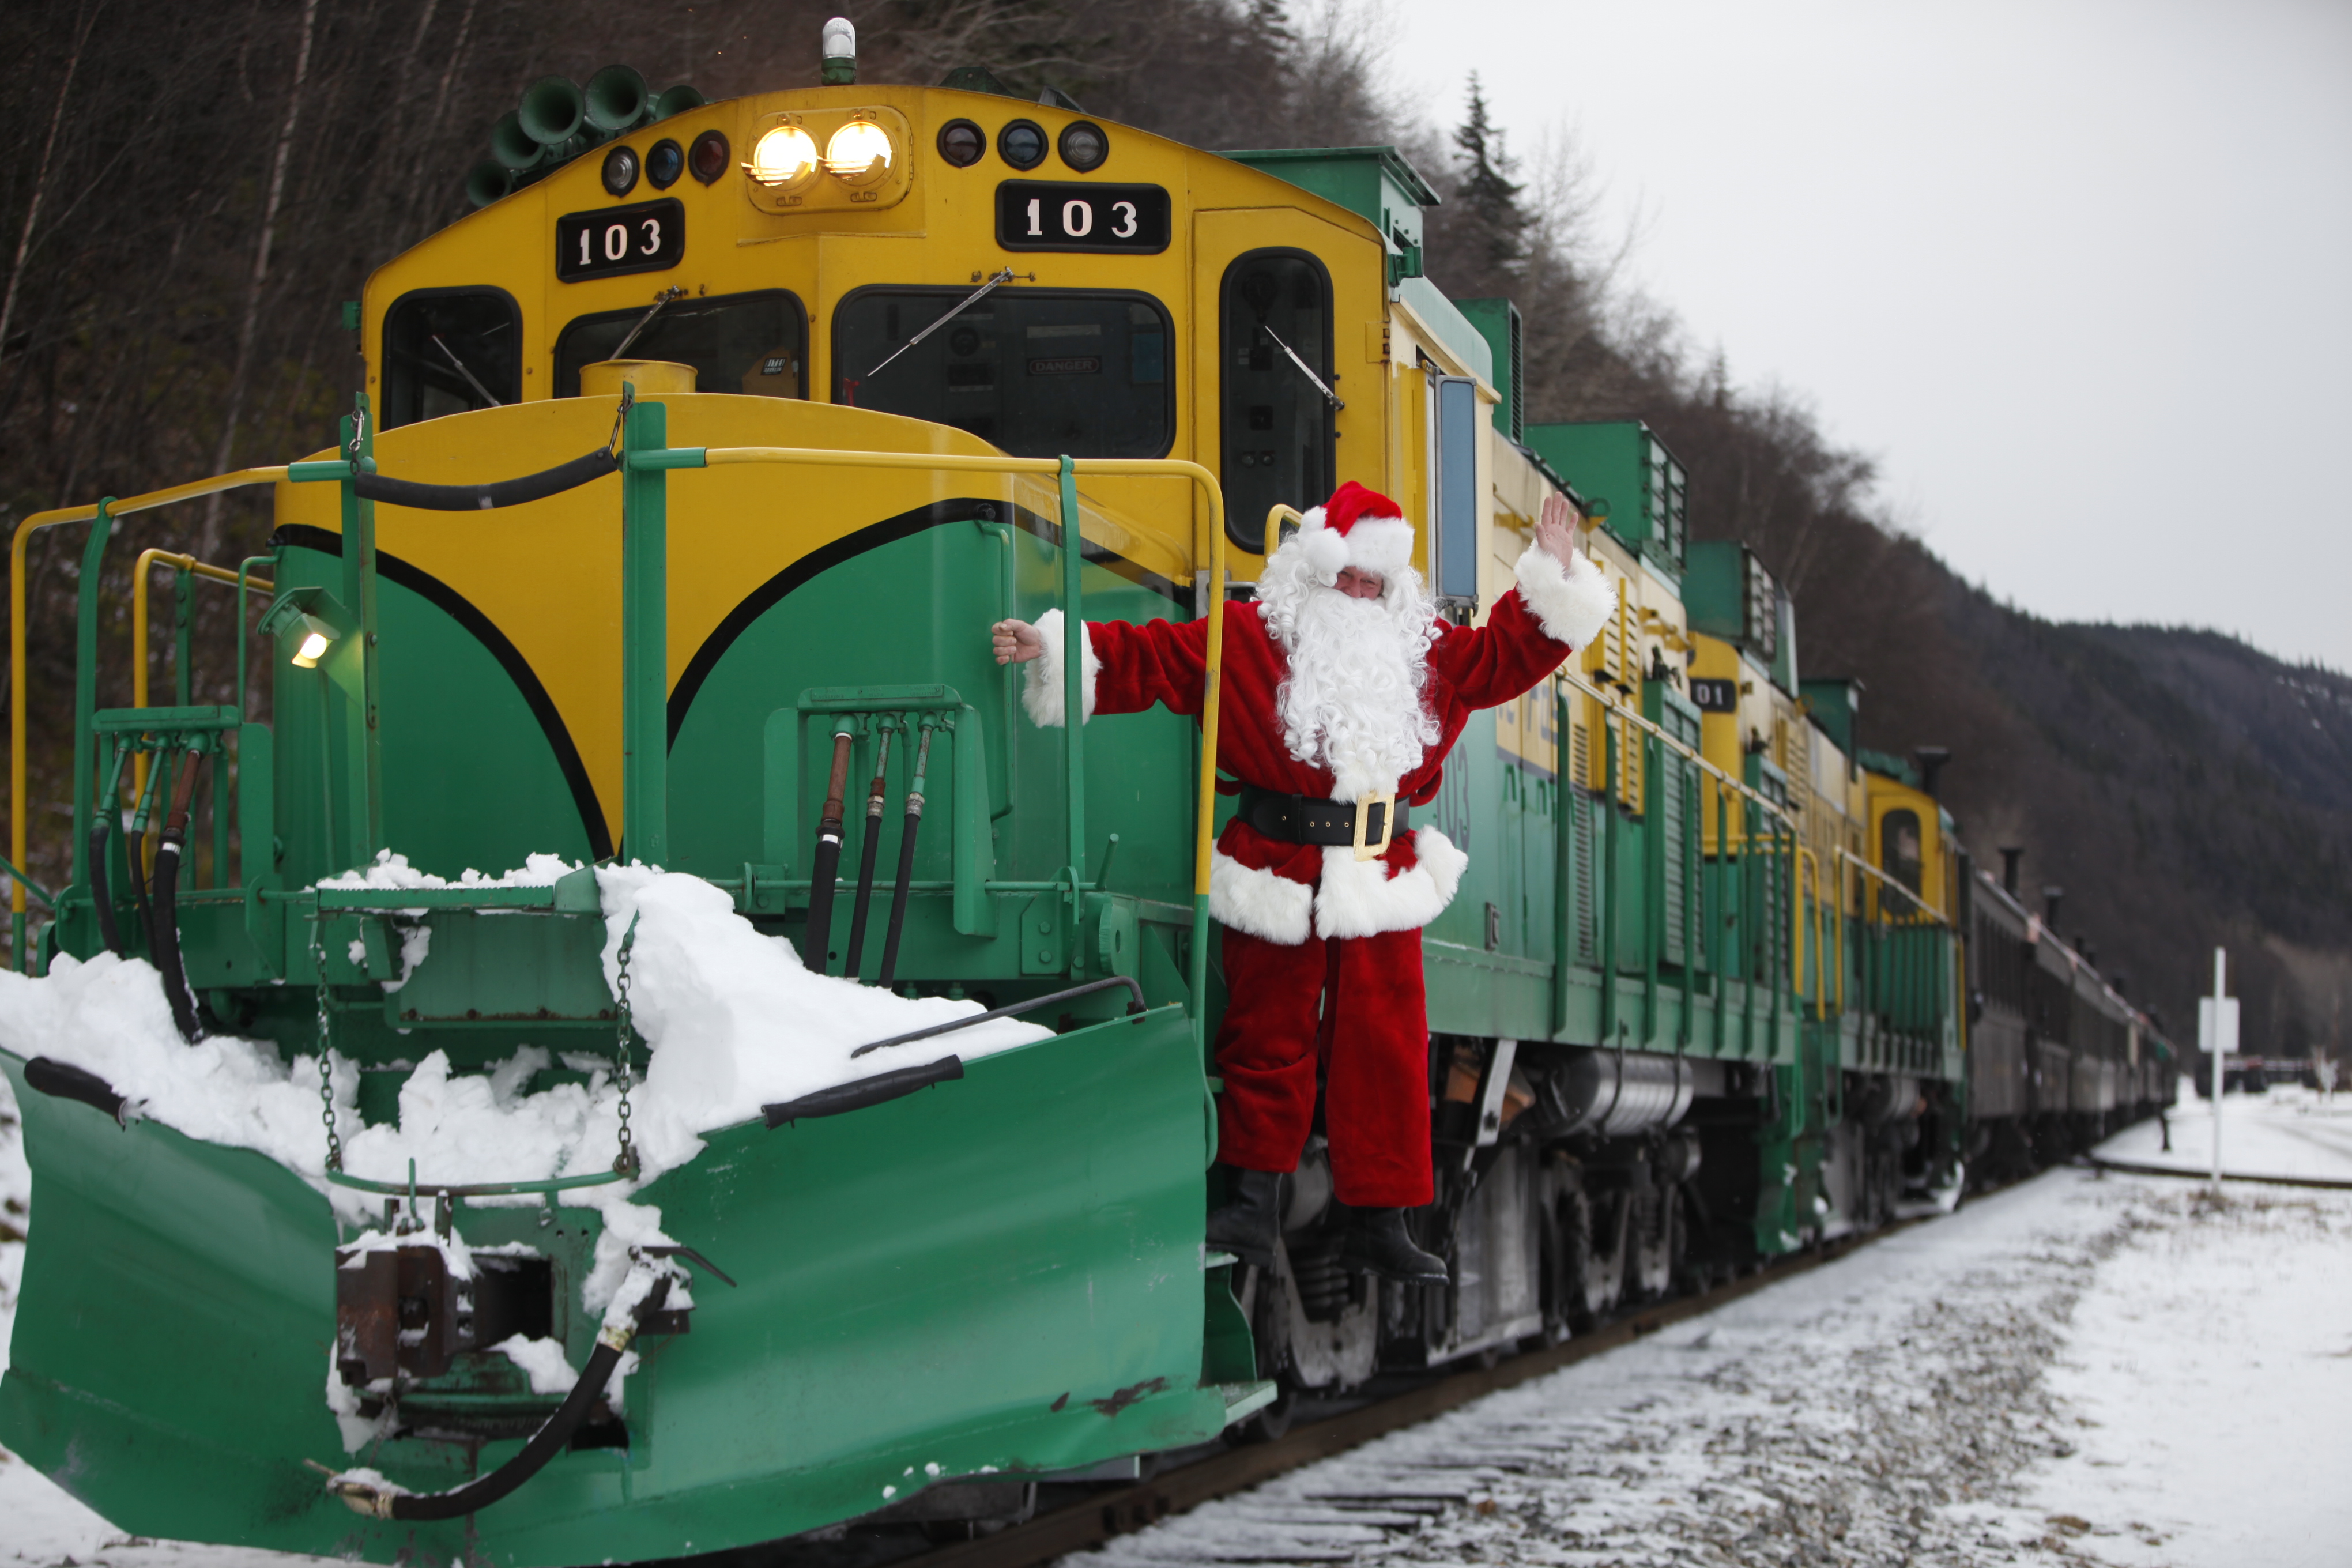 All aboard! The best Christmas train rides in America